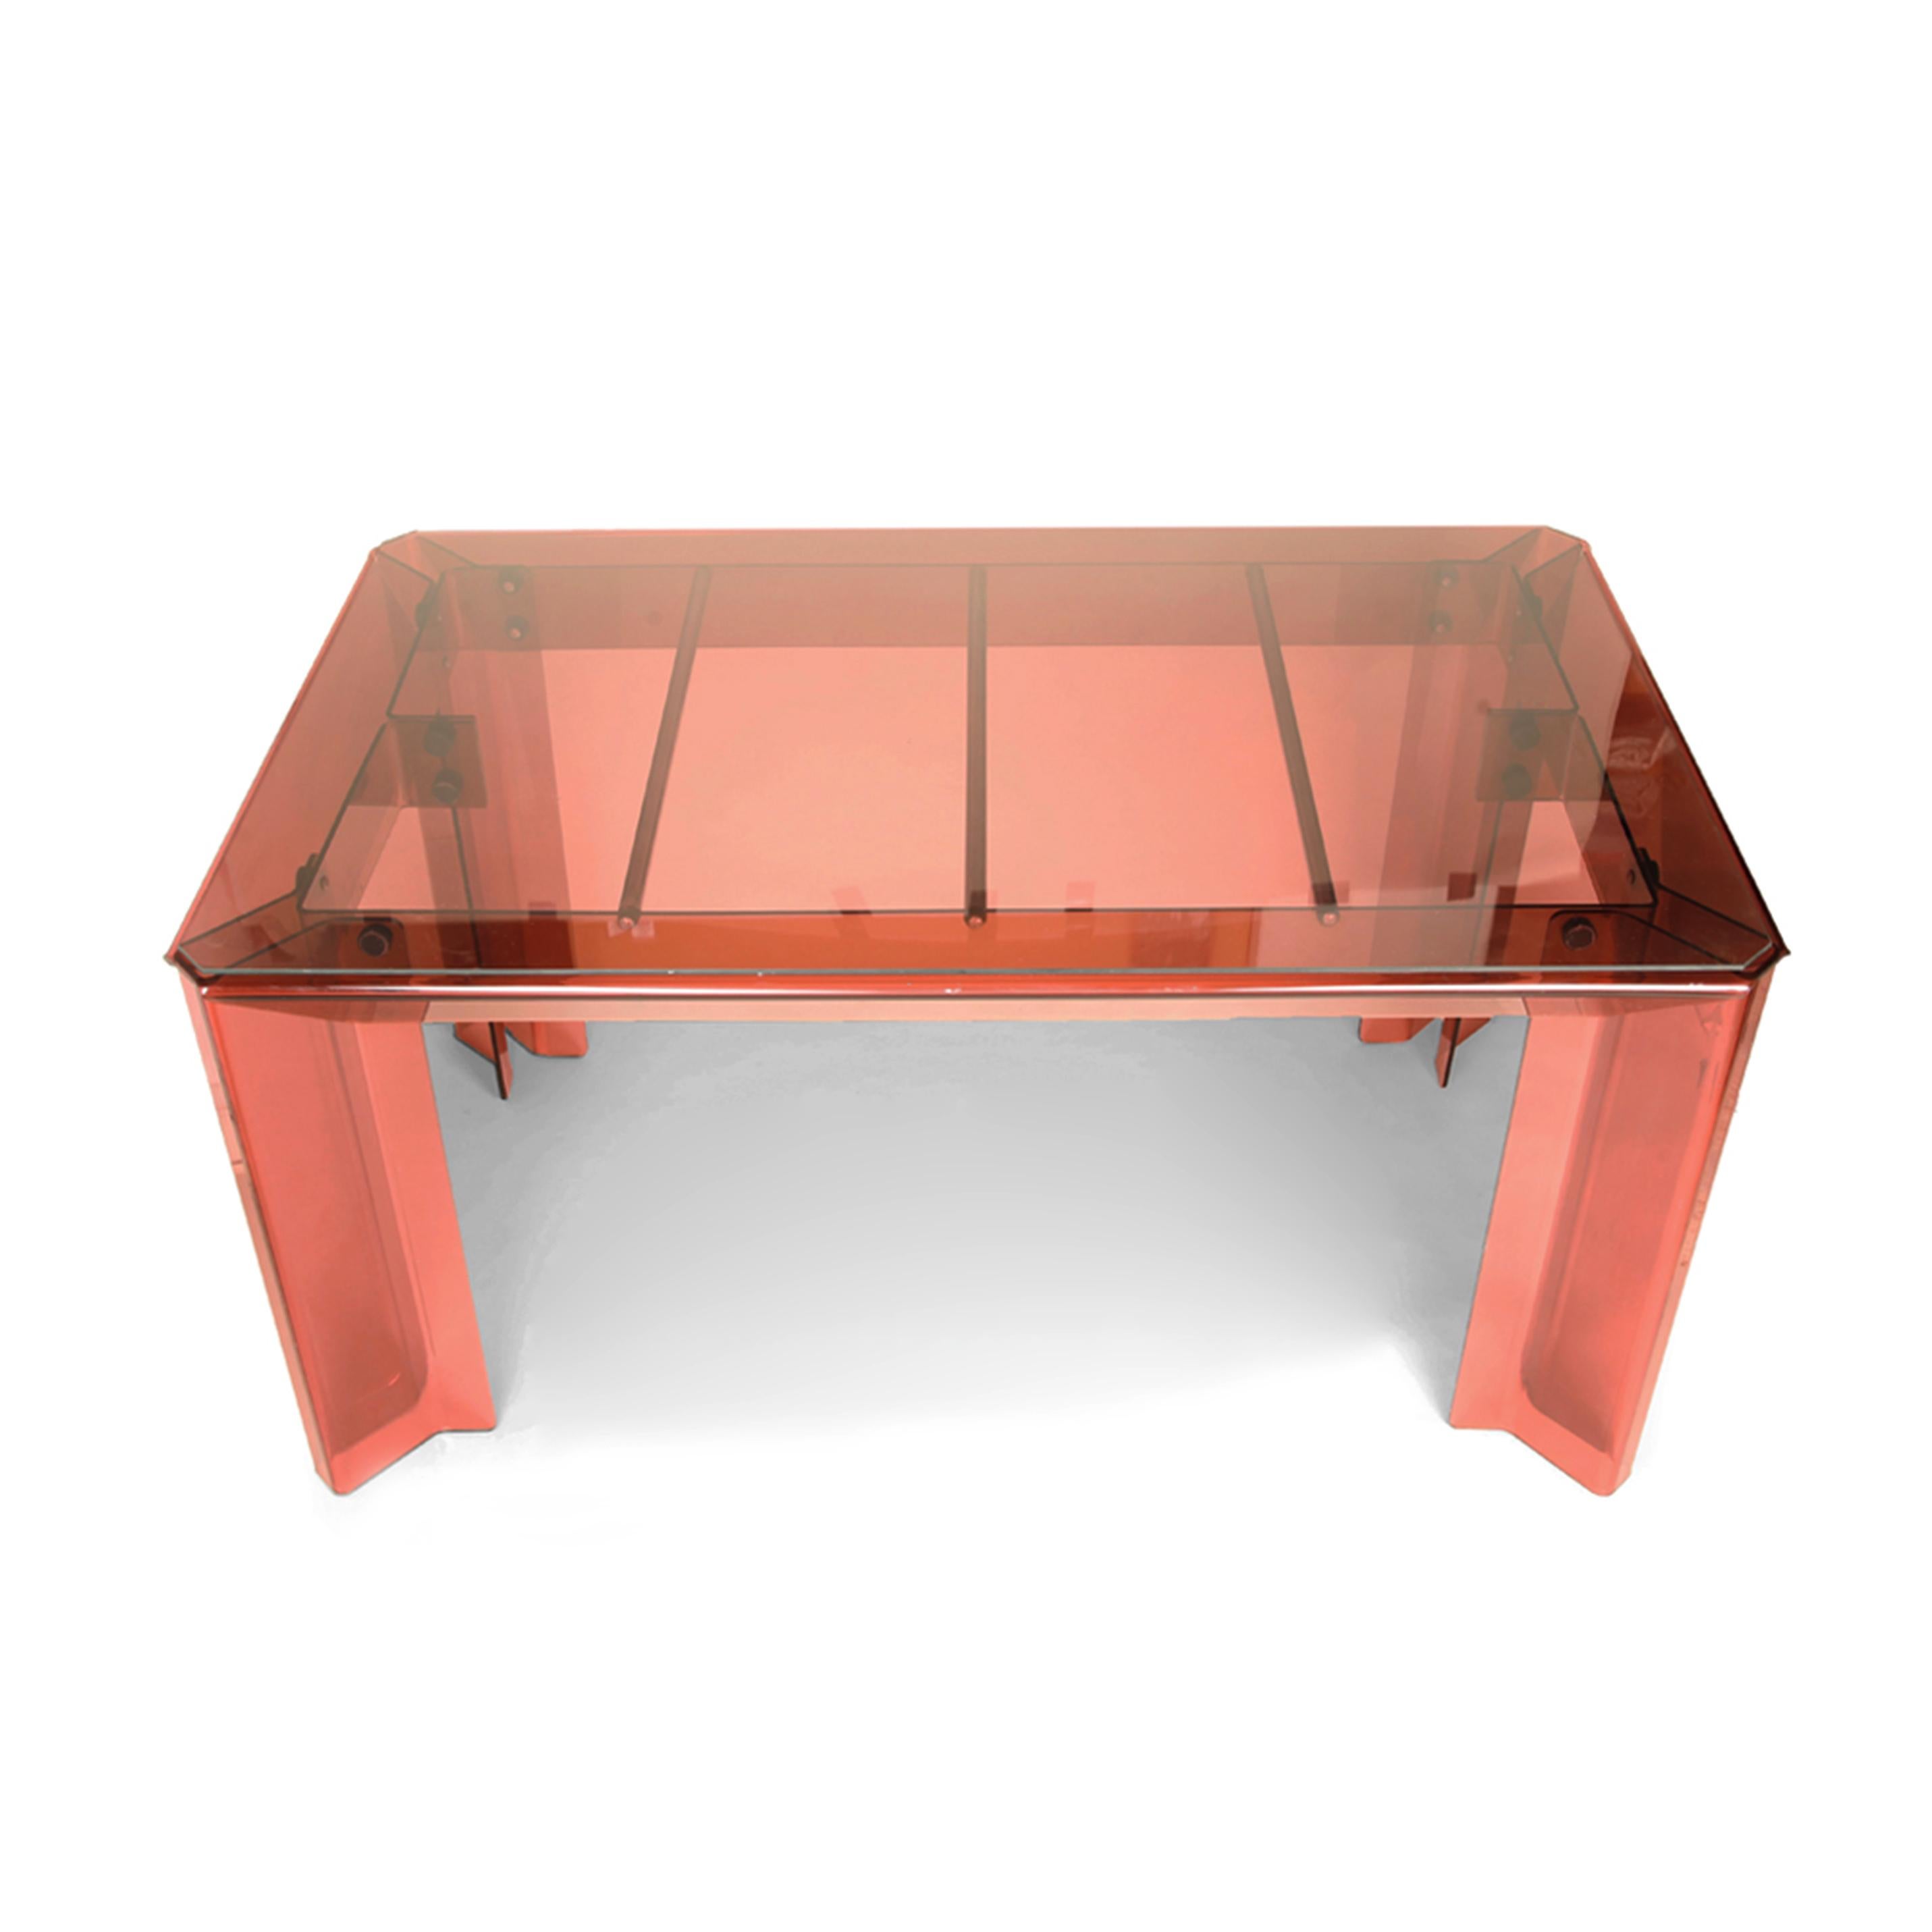 British Documented Peter Banks Unique Smoked Perspex Dining Table Space Age Midcentury